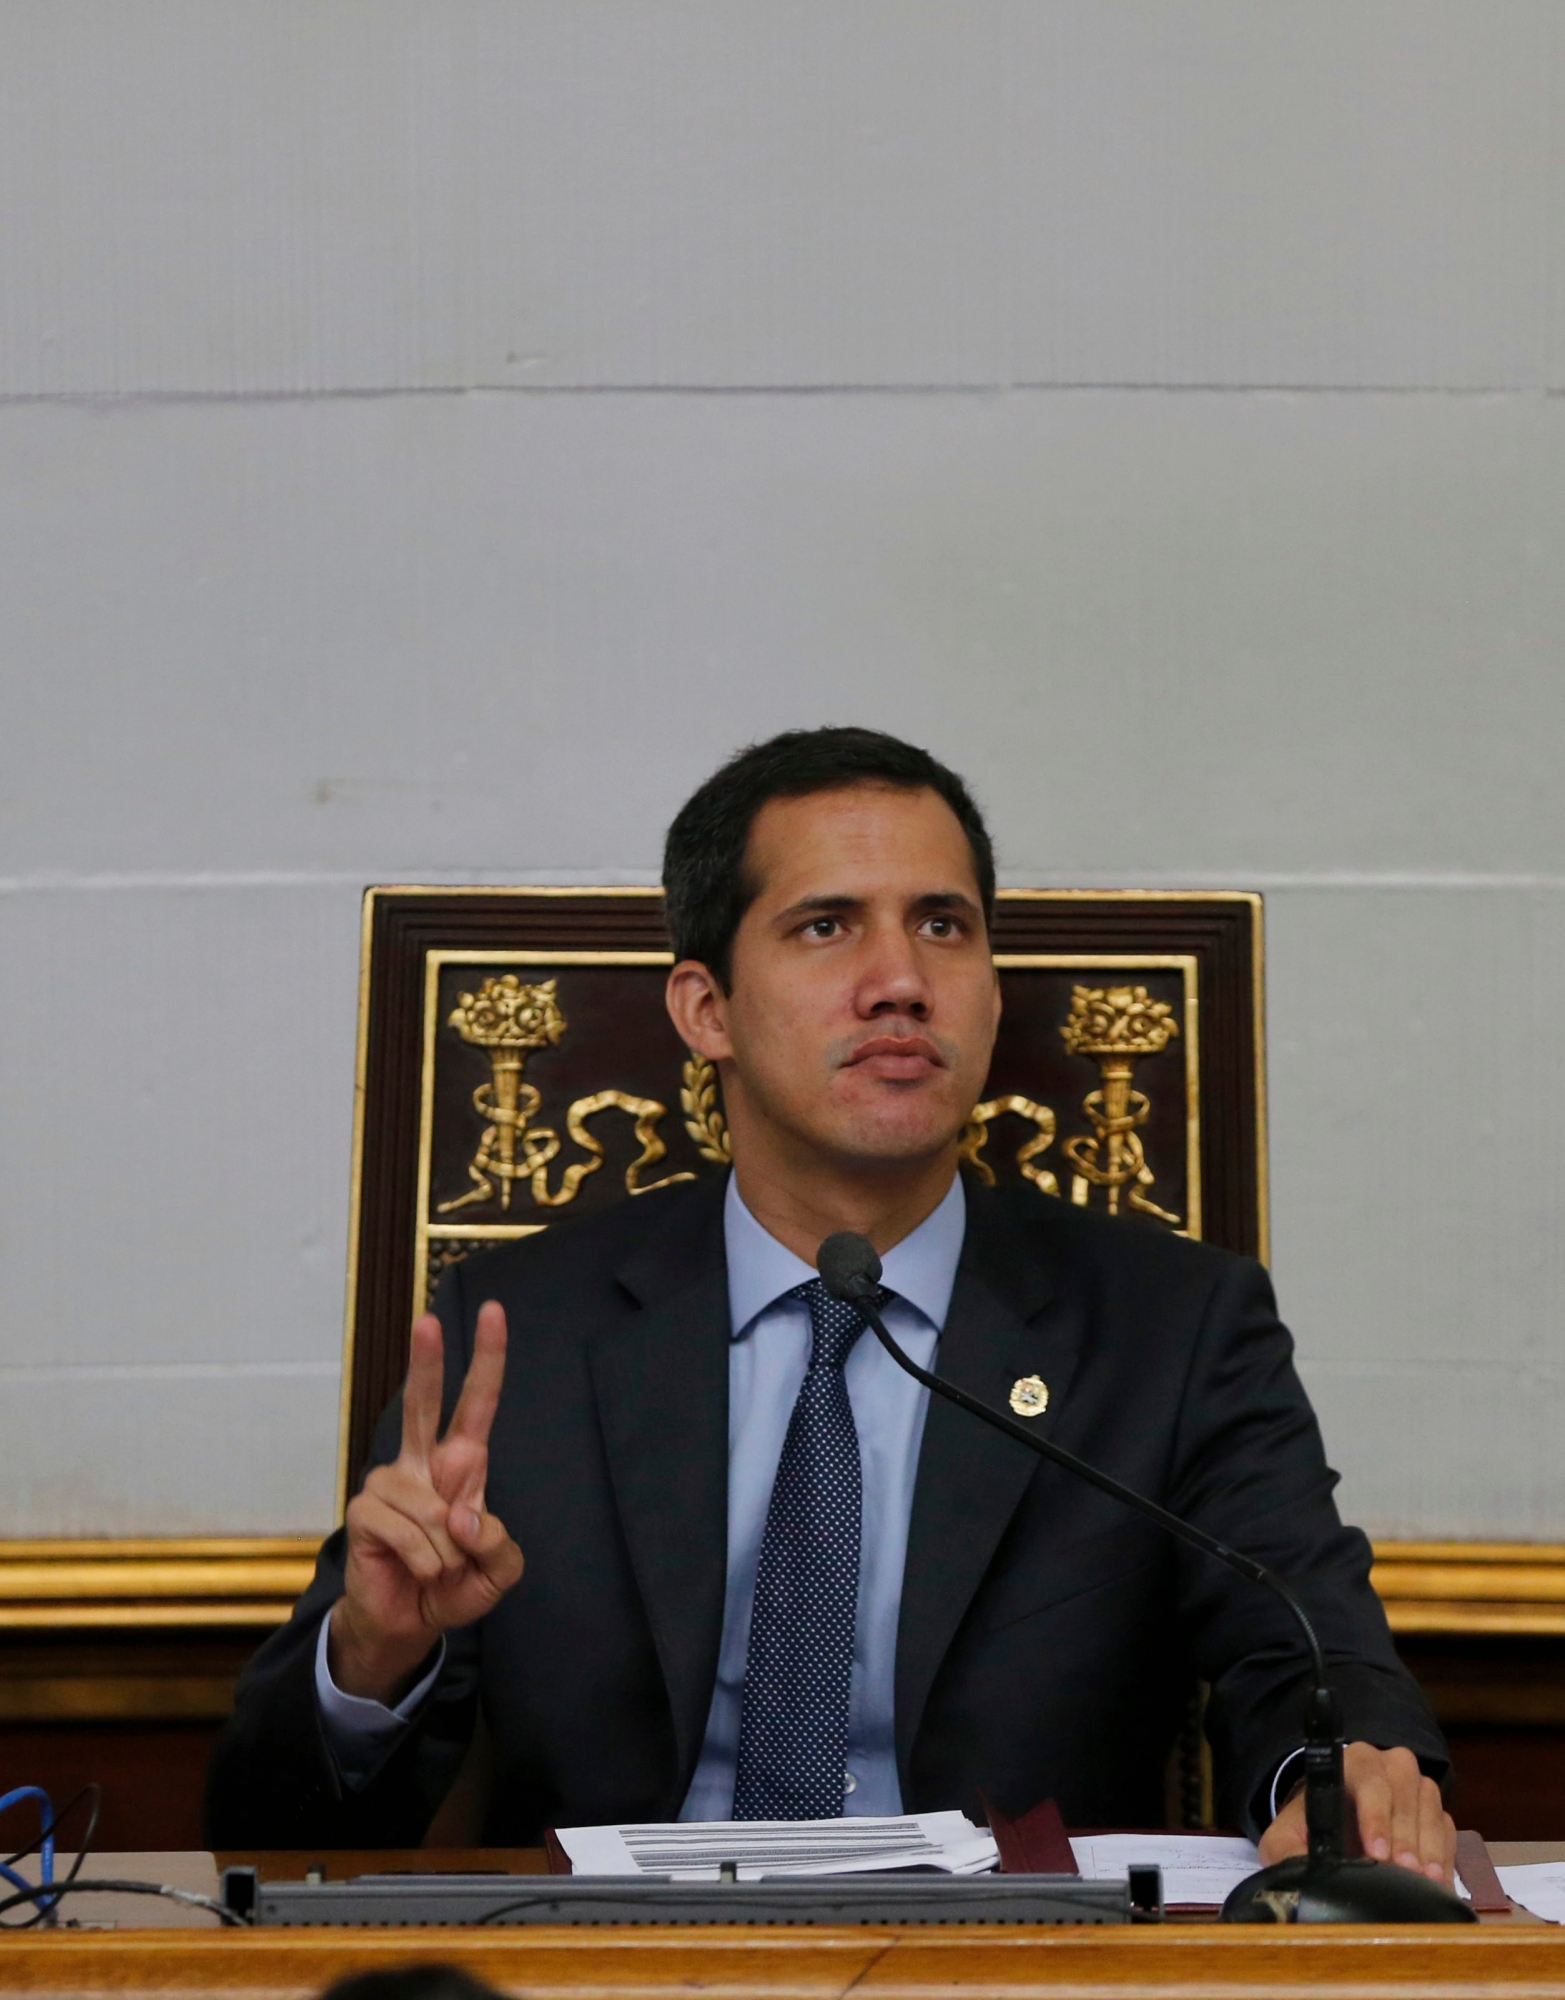 Juan Guaido, President of National Assembly and self-proclaimed interim president makes a victory sign during a session of the National Assembly in Caracas, Venezuela, Tuesday, April 2, 2019. Venezuela's chief justice on Monday asked lawmakers of the rival pro-government National Constituent Assembly to strip Guaido of his parliamentary immunity, taking a step toward prosecuting him for alleged crimes as he seeks to oust President Nicolas Maduro.(AP Photo/Fernando Llano) Venezuela Political Crisis